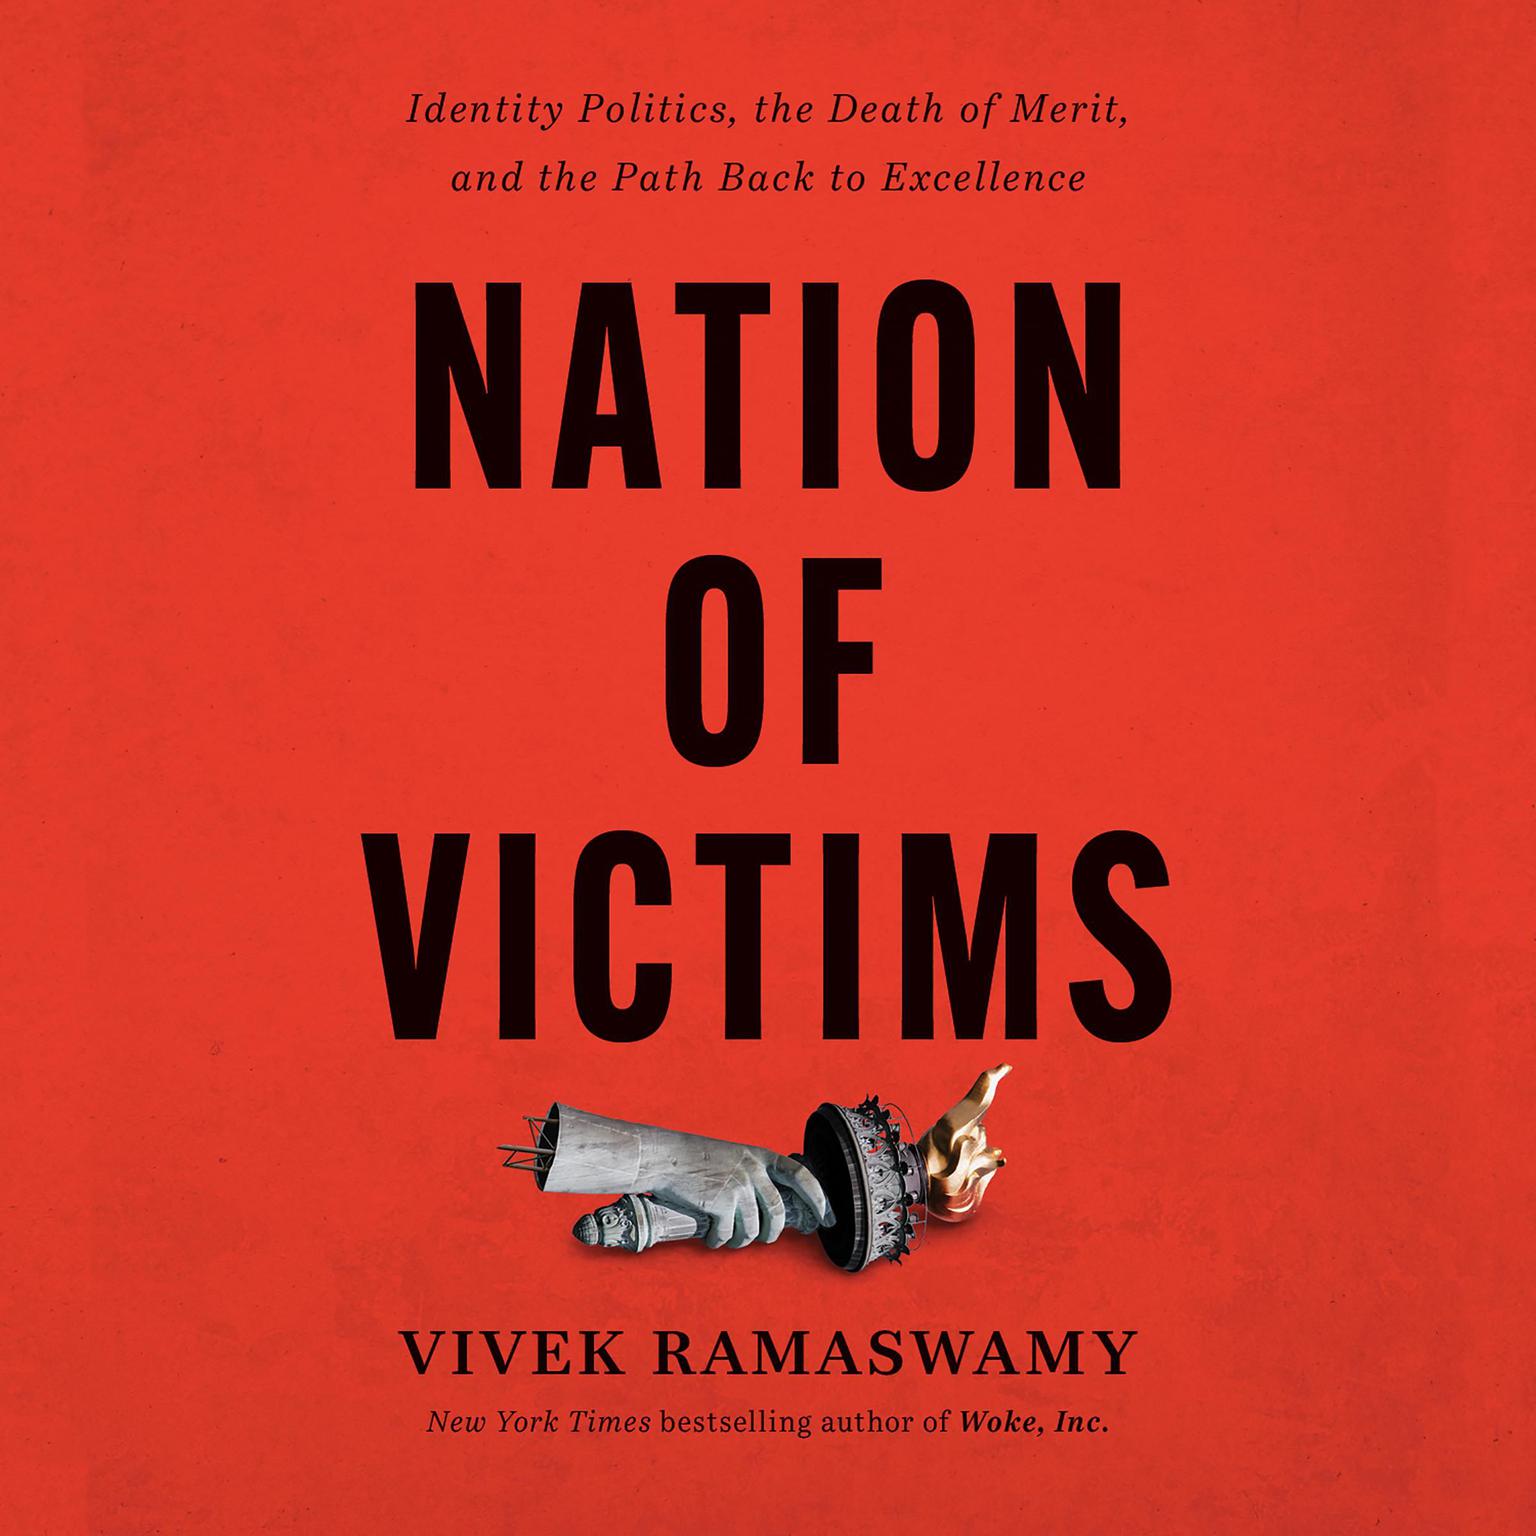 Nation Of Victims: Identity Politics, the Death of Merit, and the Path Back to Excellence Audiobook, by Vivek Ramaswamy